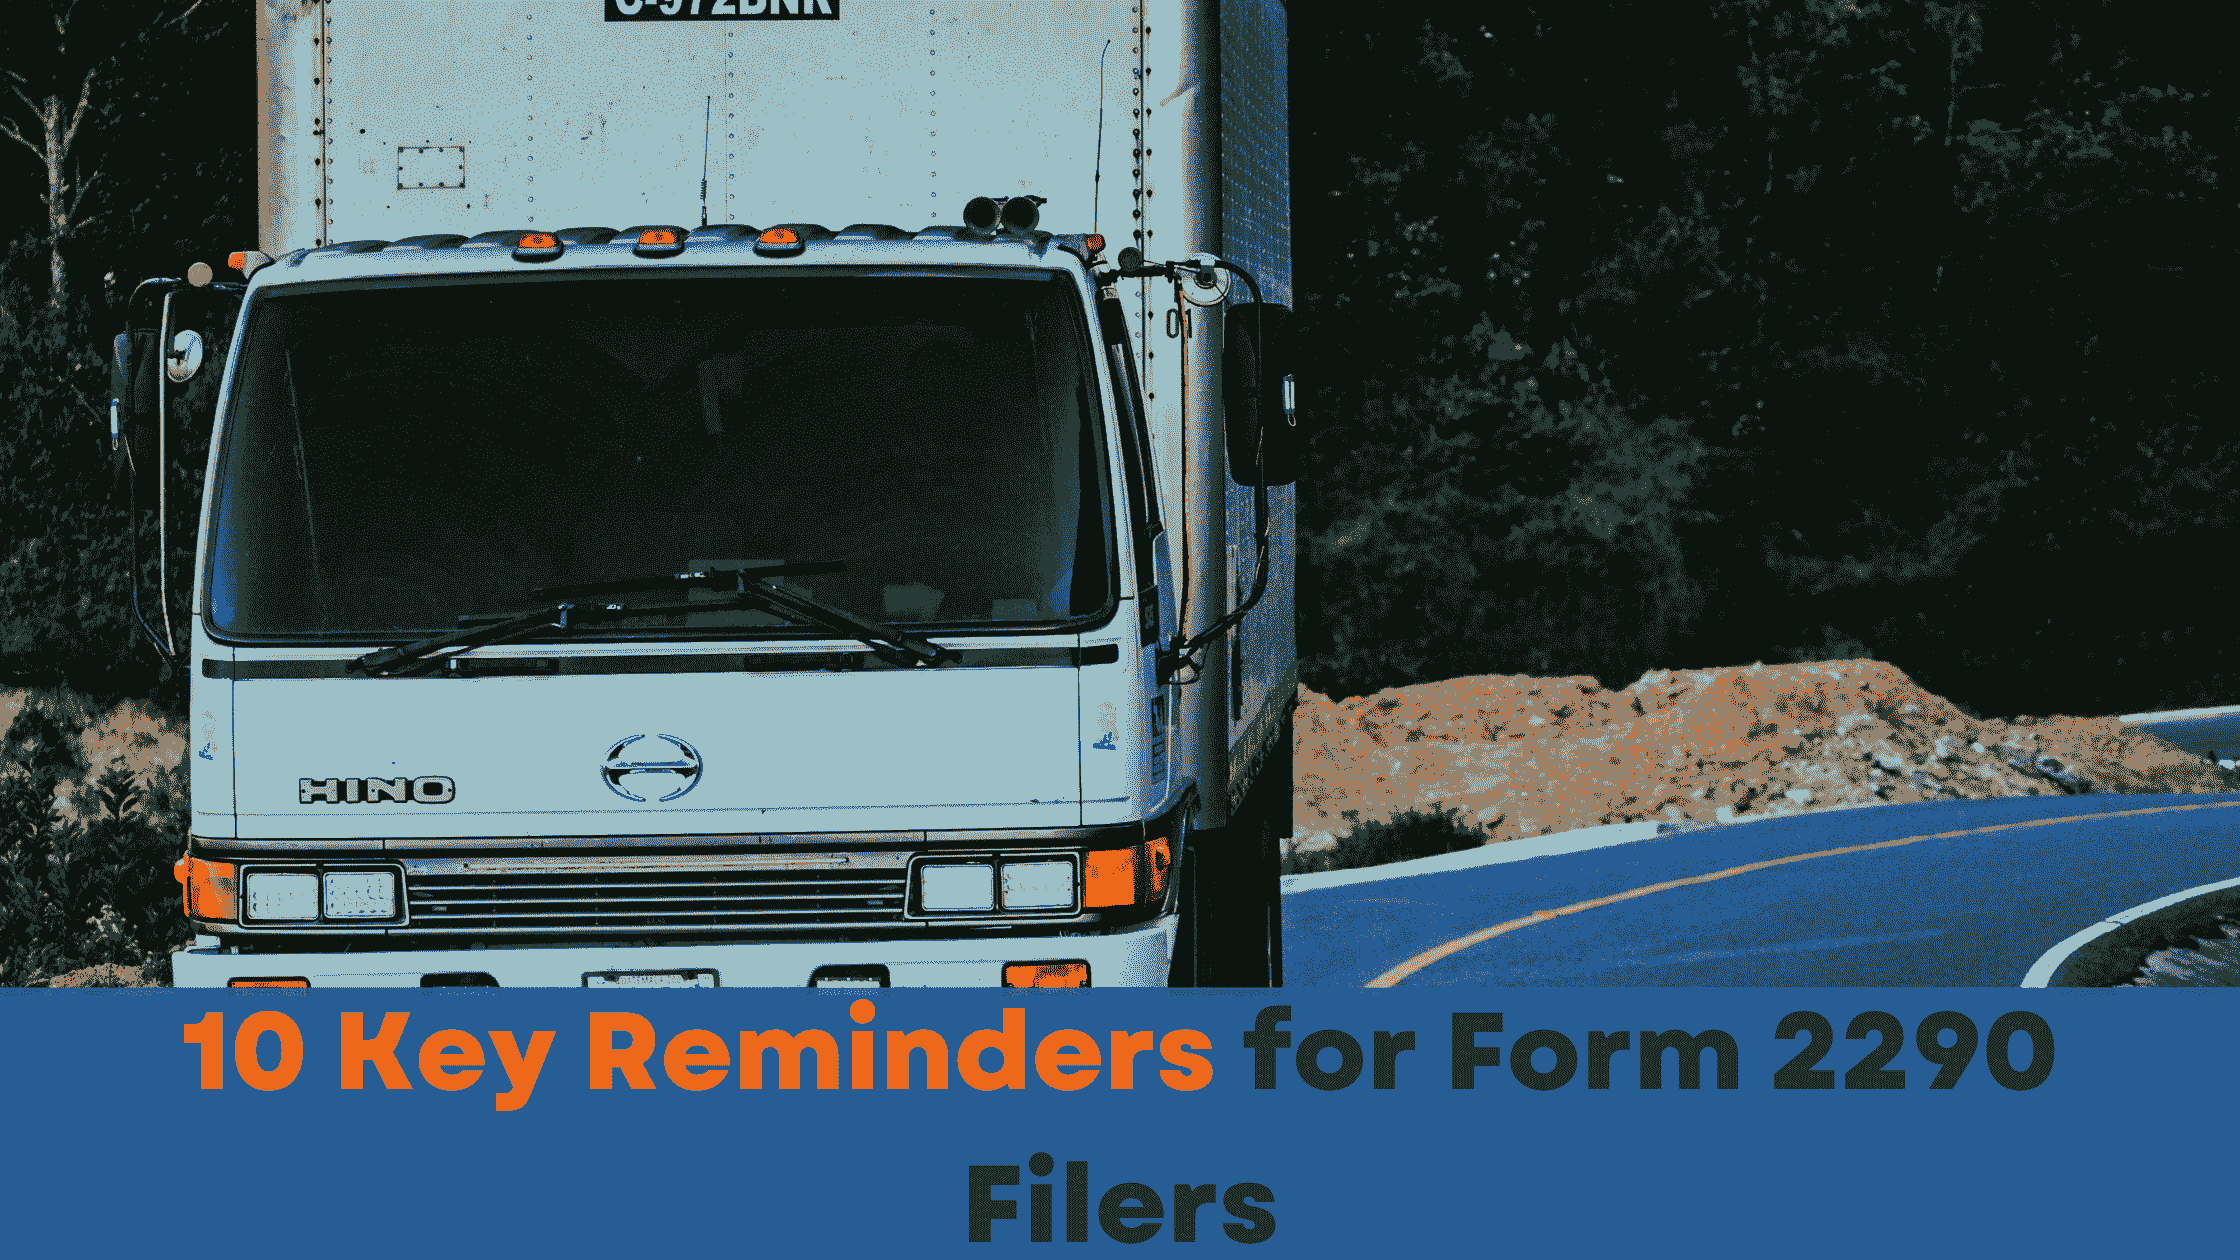 10 Key Reminders for Form 2290 Filers